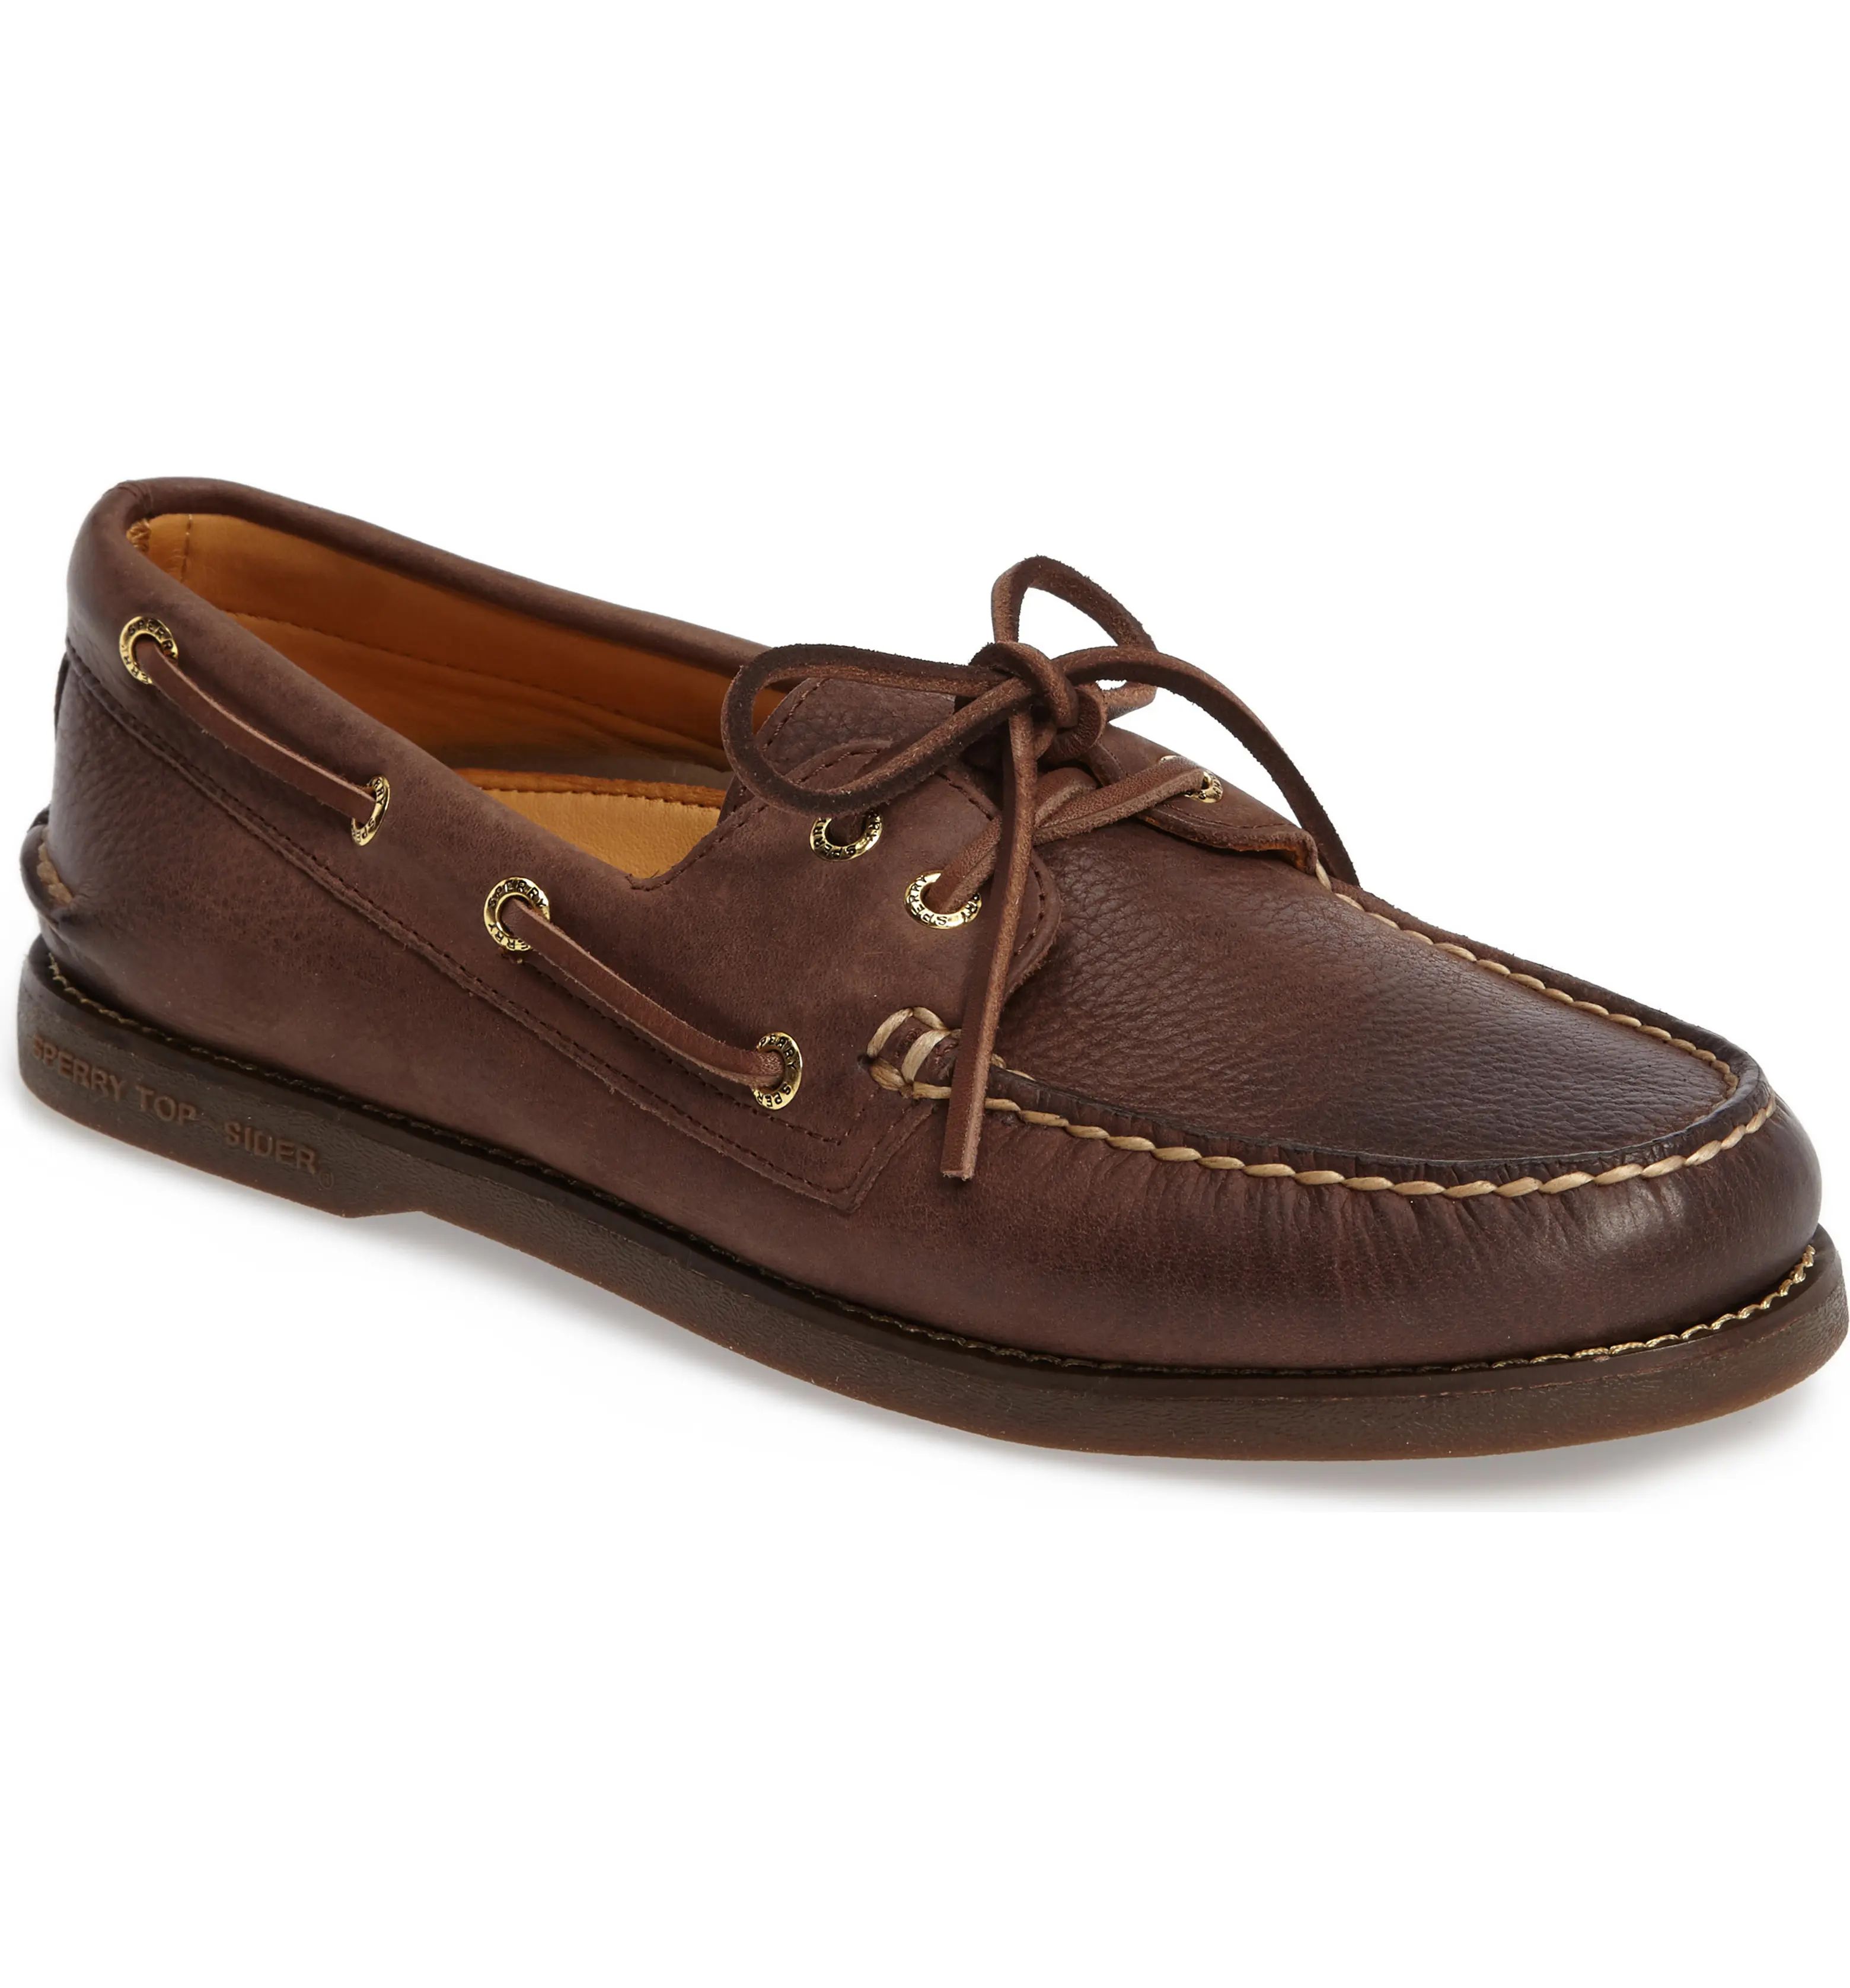 'Gold Cup - Authentic Original' Boat Shoe | Nordstrom